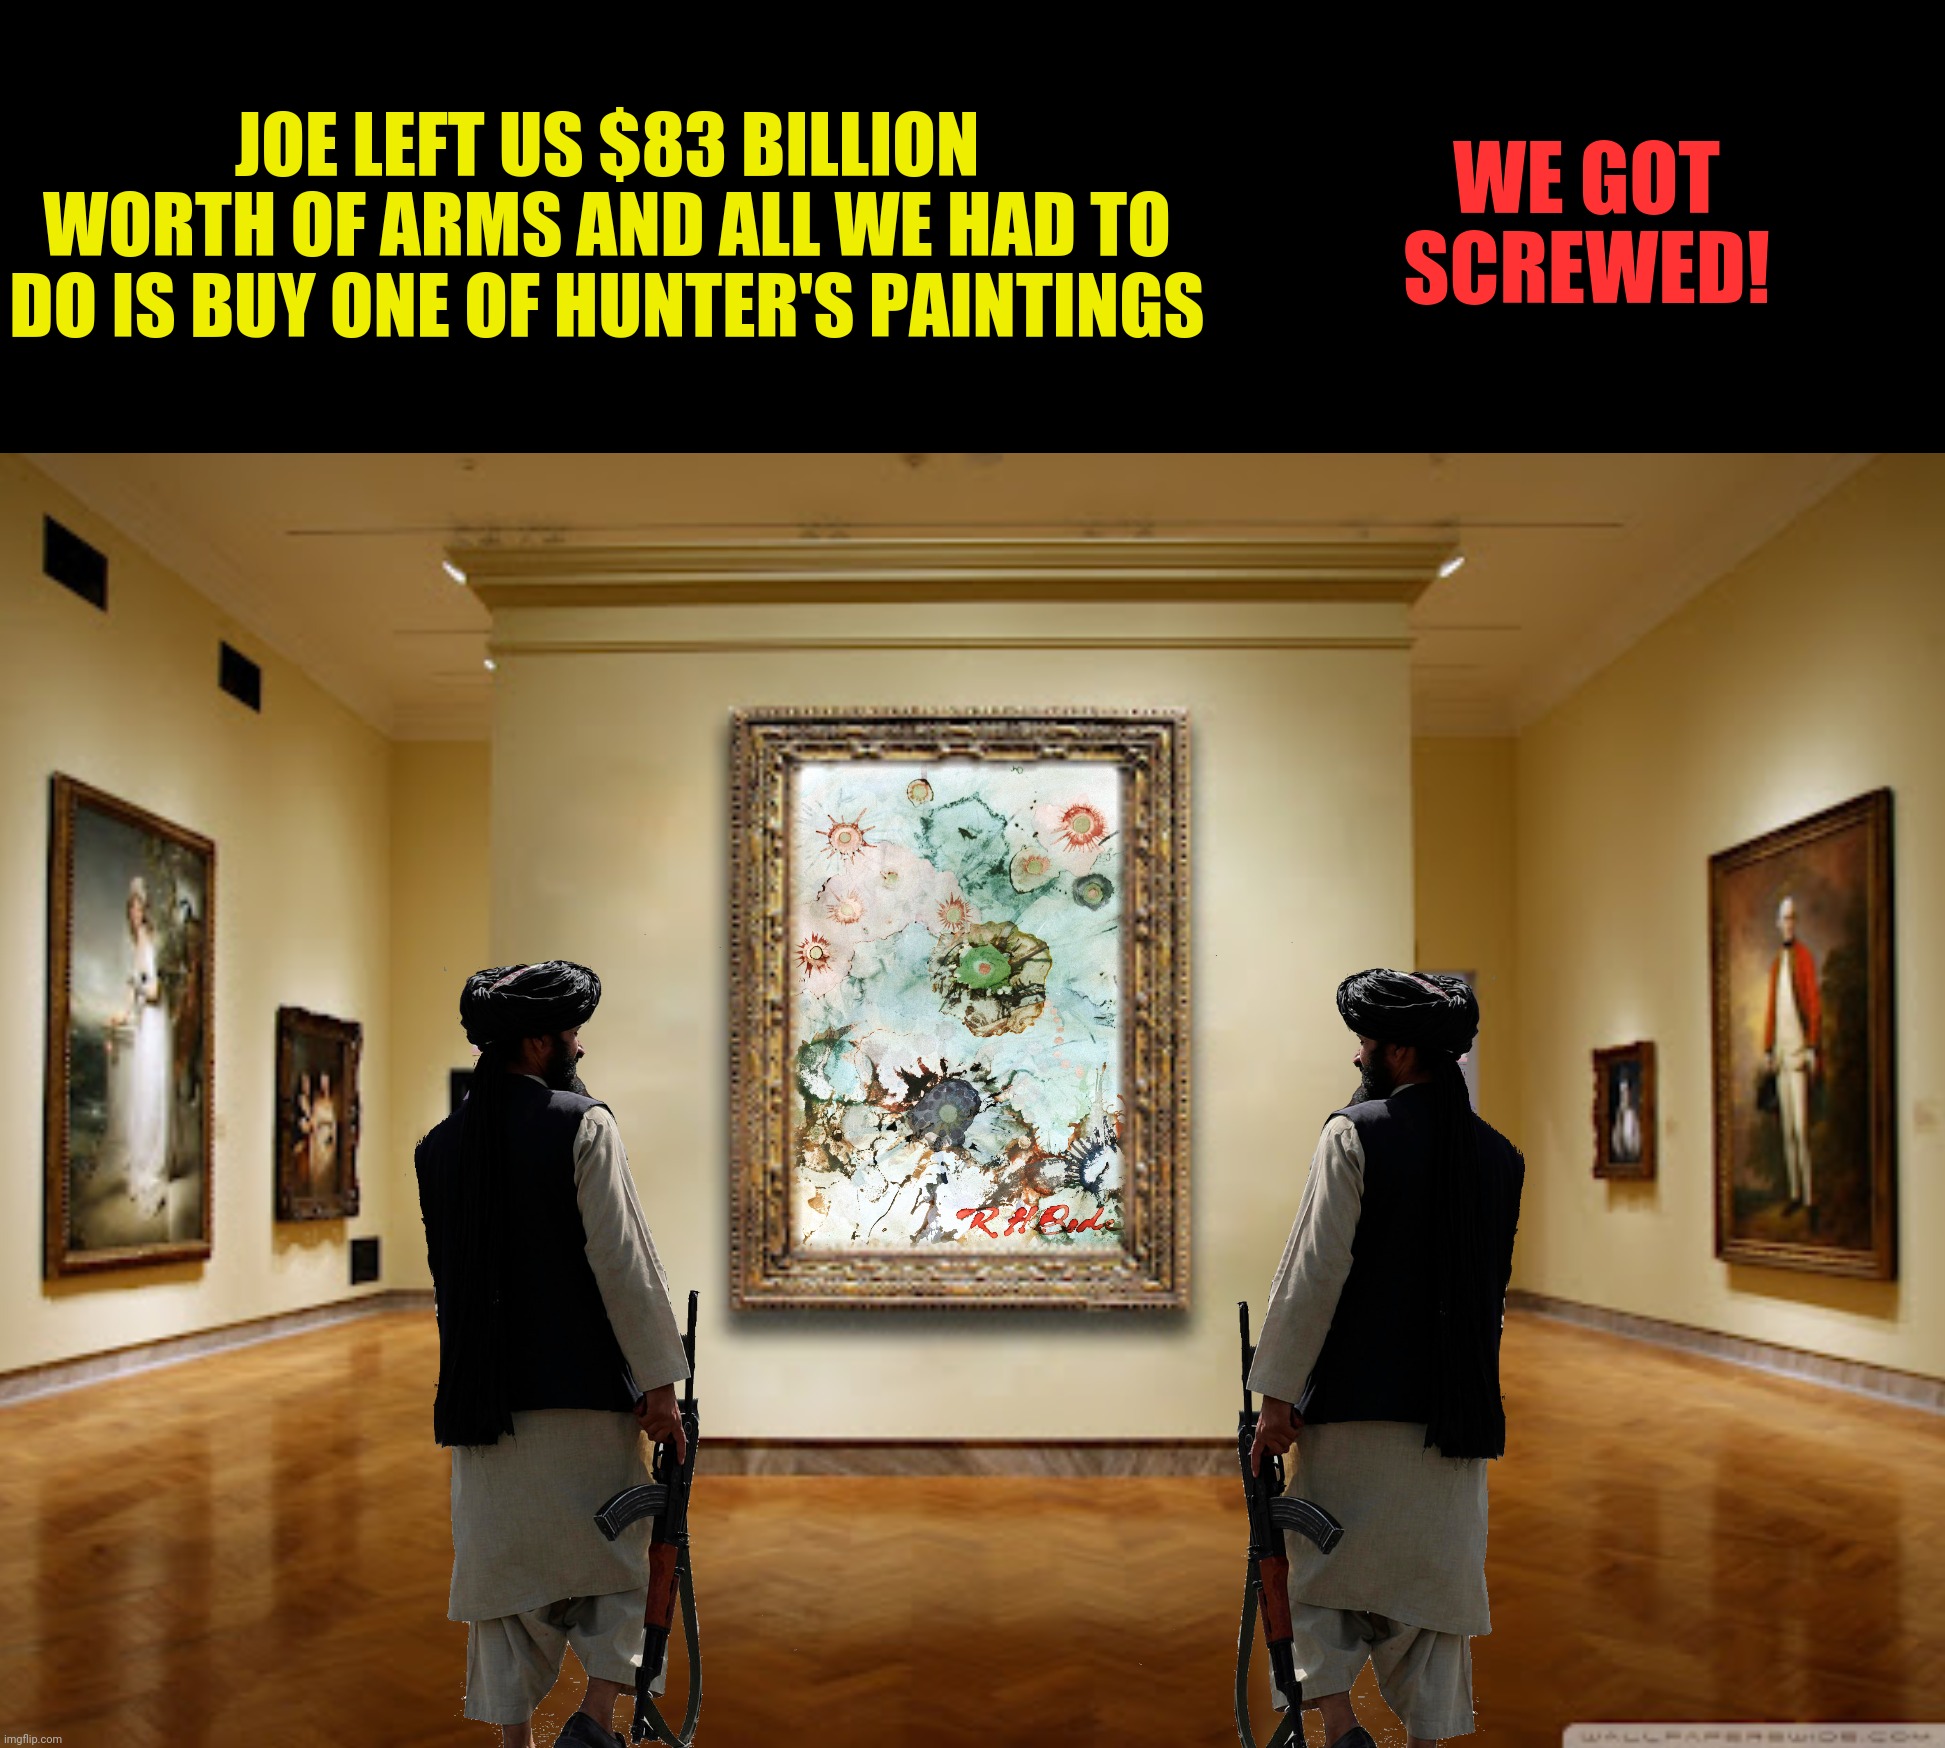 The "Art" Of The Deal | JOE LEFT US $83 BILLION WORTH OF ARMS AND ALL WE HAD TO DO IS BUY ONE OF HUNTER'S PAINTINGS WE GOT SCREWED! | image tagged in bad photoshop,hunter biden,taliban,art | made w/ Imgflip meme maker